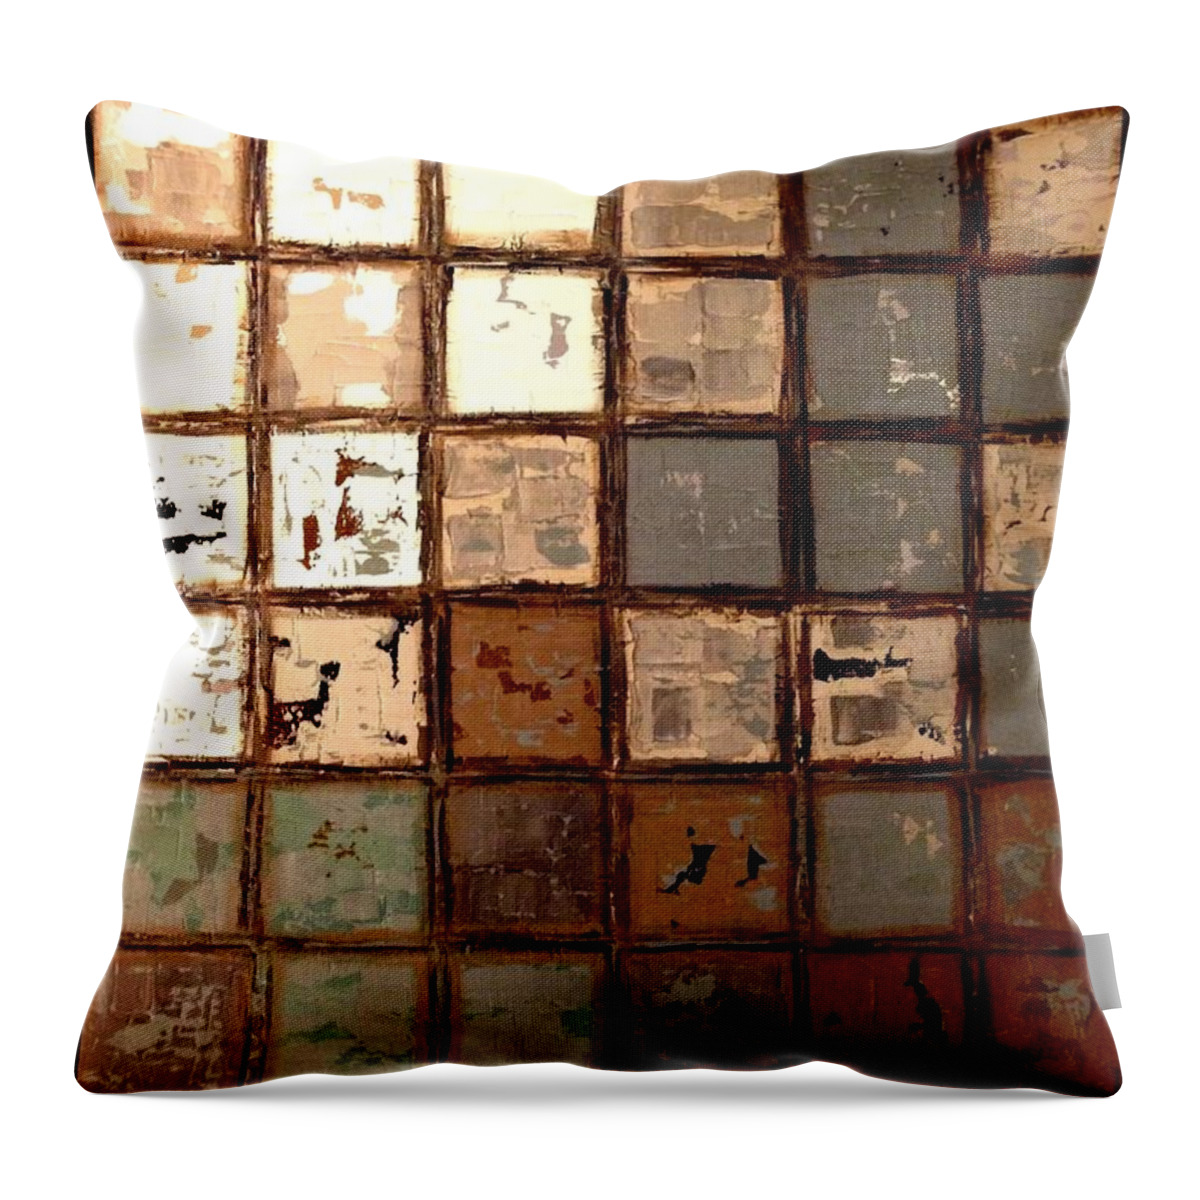 Plastered Throw Pillow featuring the digital art Plastered Wall by Linda Bailey